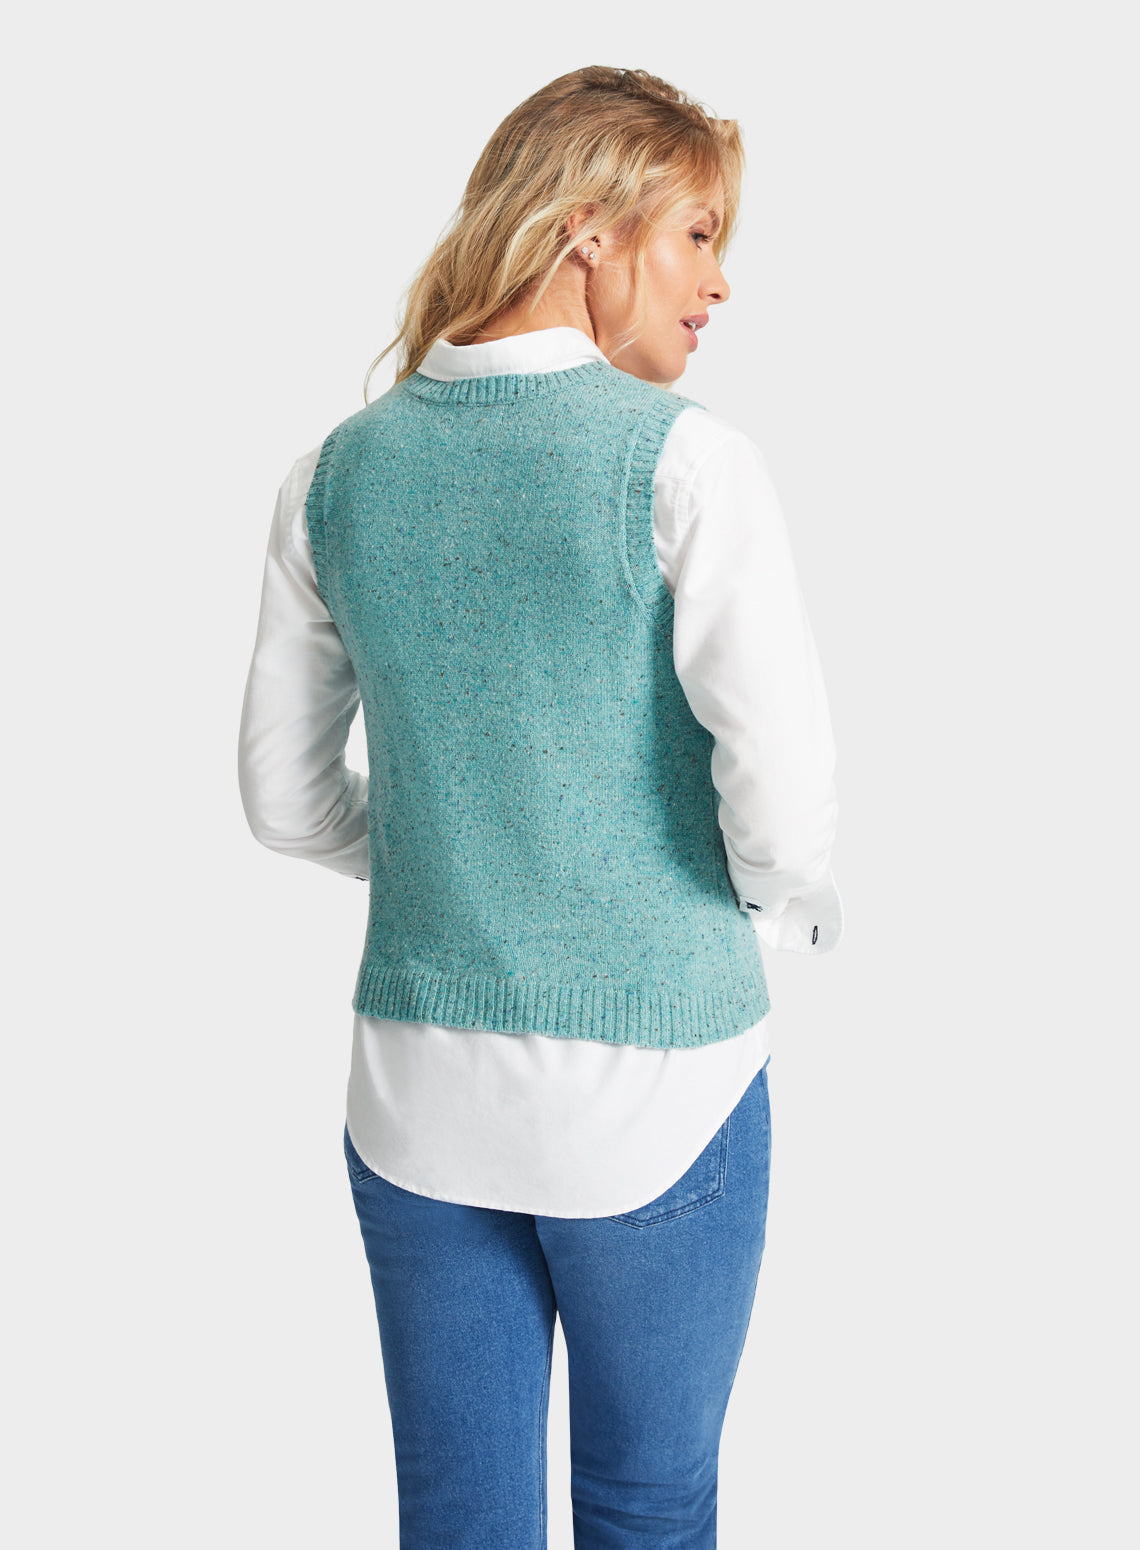 Knitted Neppy Vest in Mint